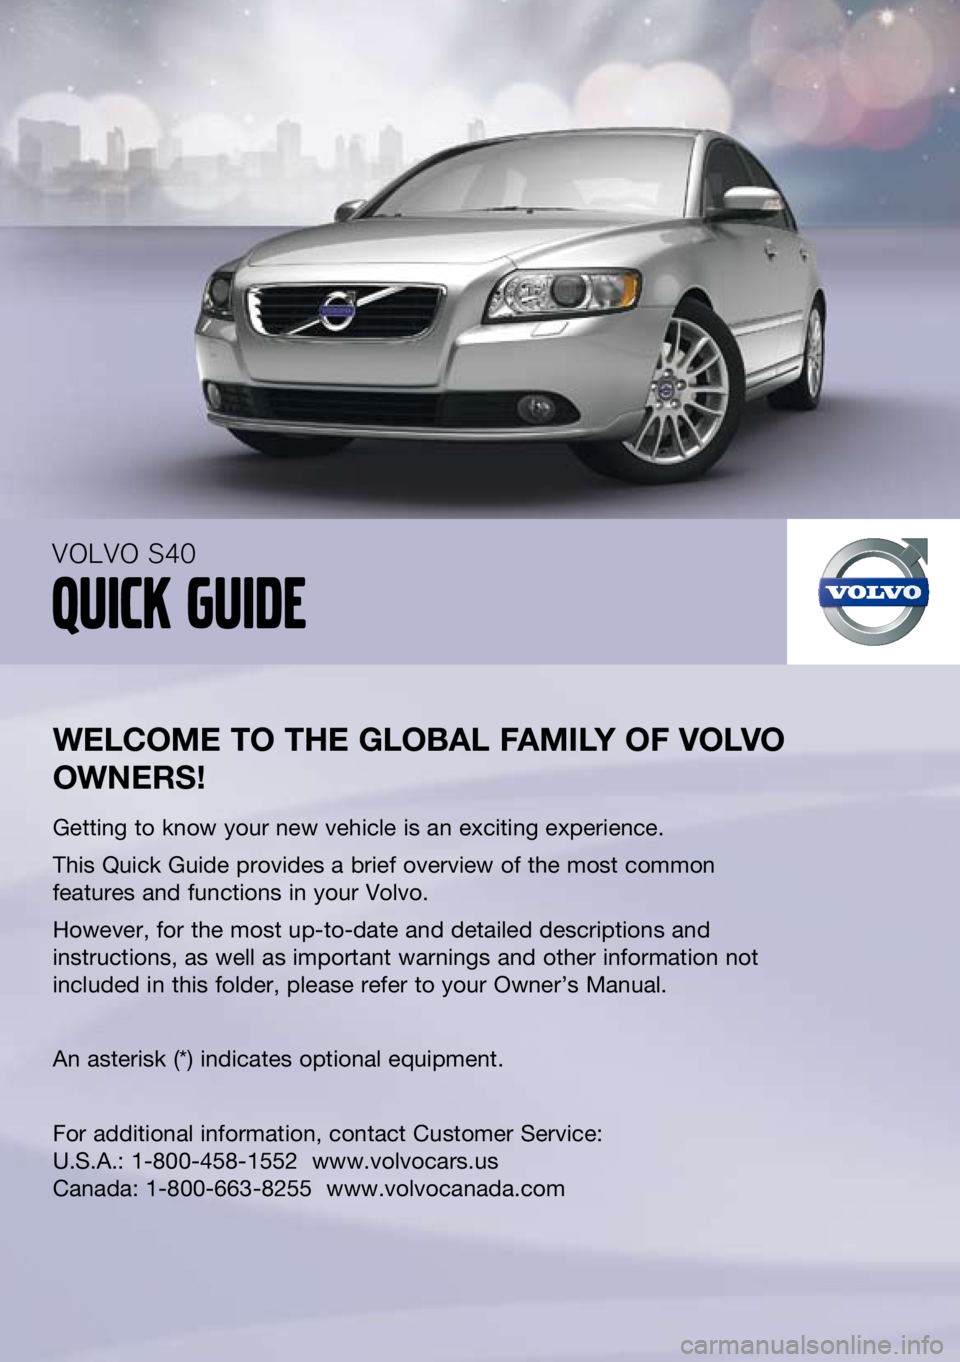 VOLVO S40 2011  Quick Guide 
    --
welcome to the  global F amIly  oF  volvo 
owners !
Getting to know your new vehicle is an exciting experience.
This Quick Guide provides a brief overview of the most common 
features and func